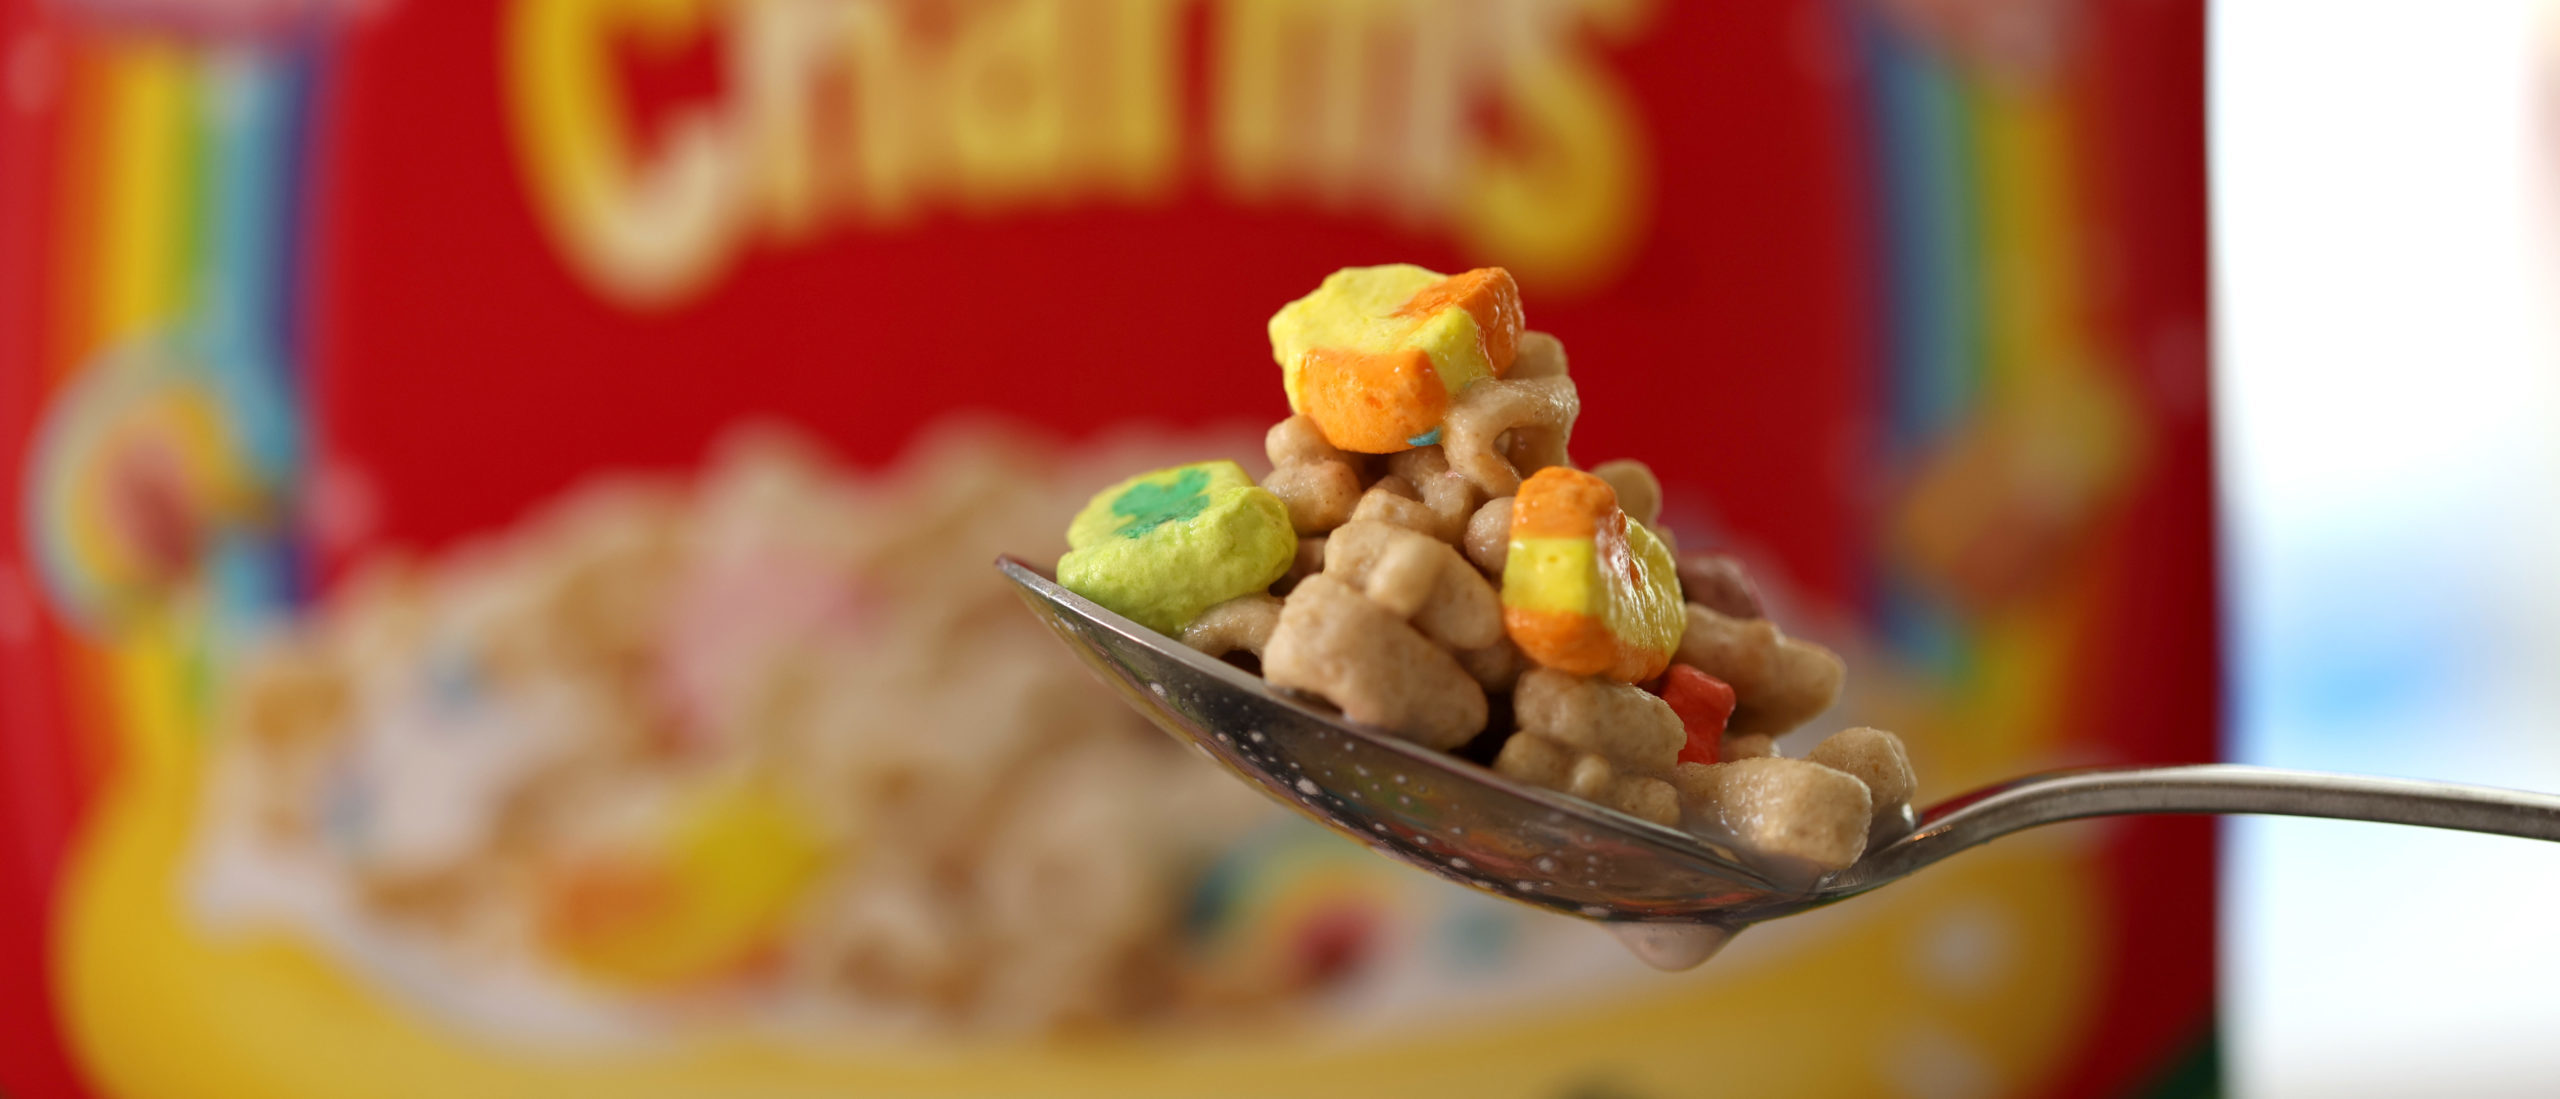 Conspiracy-Filled Note Found In Sealed Cereal Box, Other Food Products